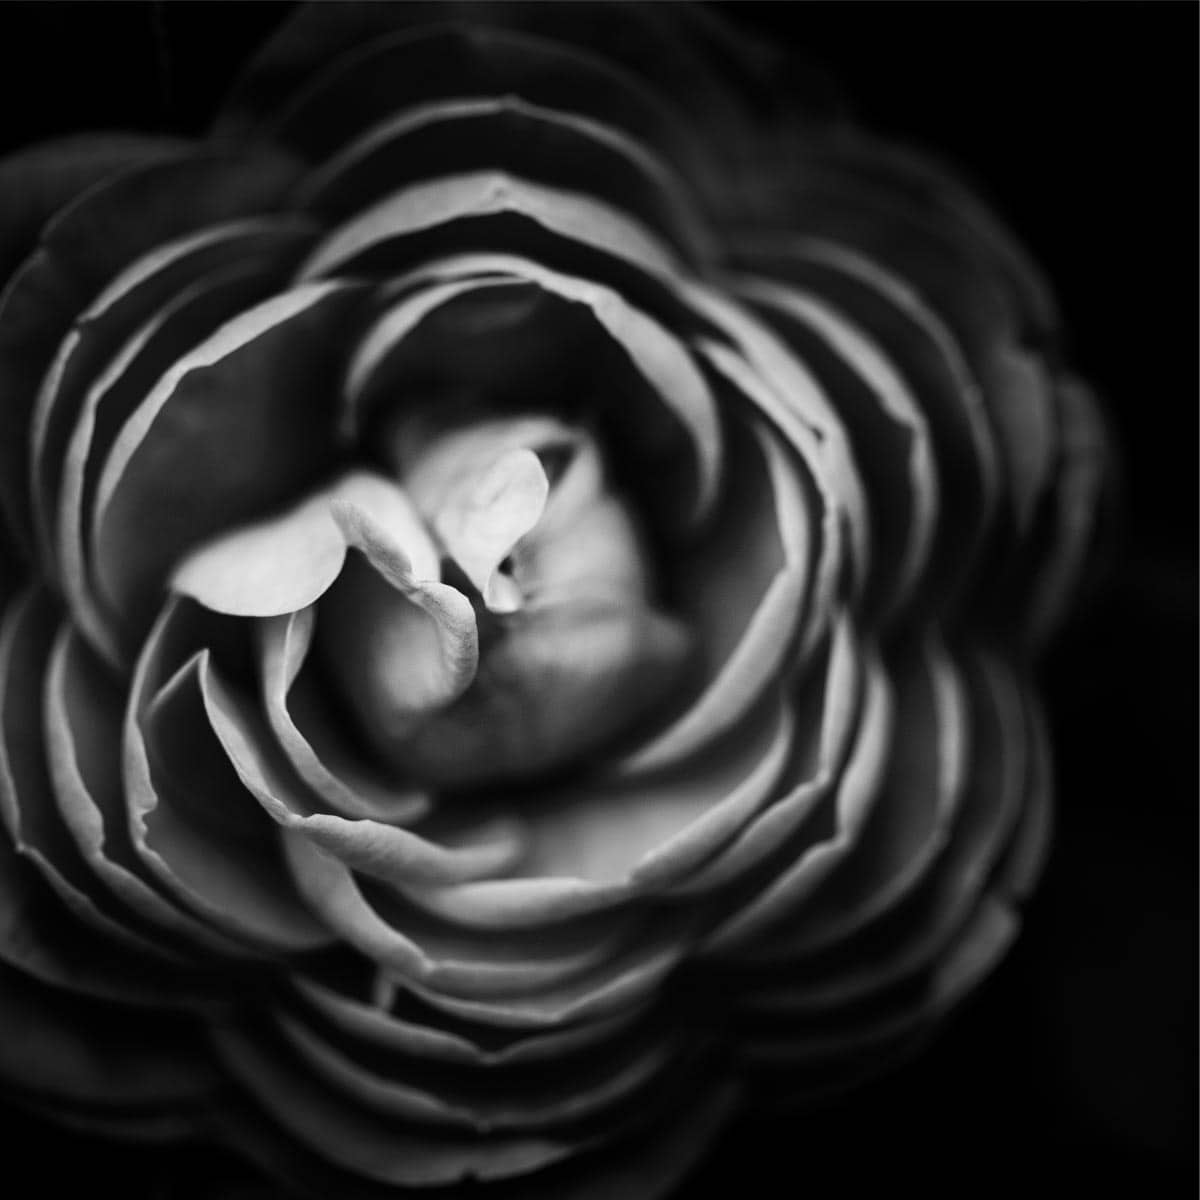 How To Make An Image Black And White in CorelDRAW